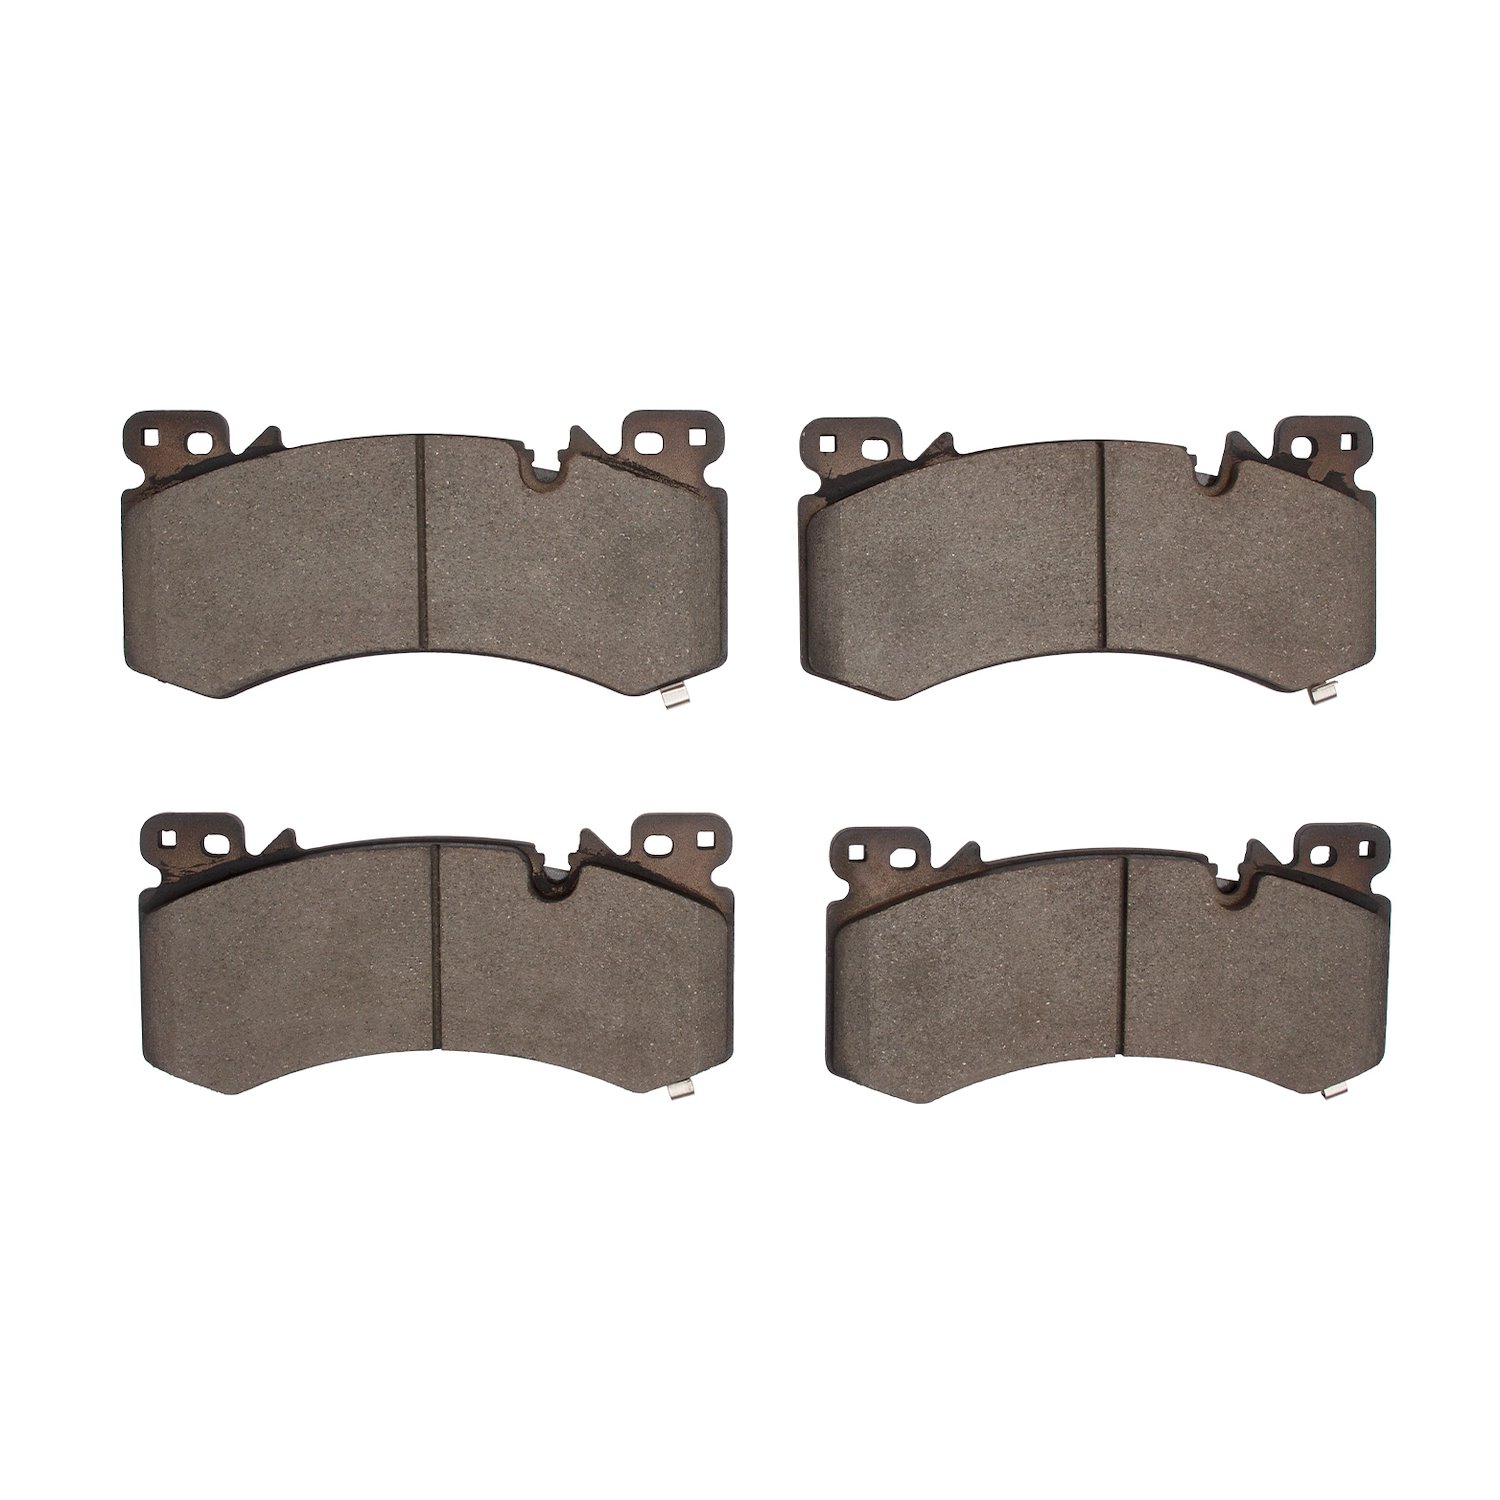 1551-2407-10 5000 Advanced Ceramic Brake Pads, Fits Select GM, Position: Front